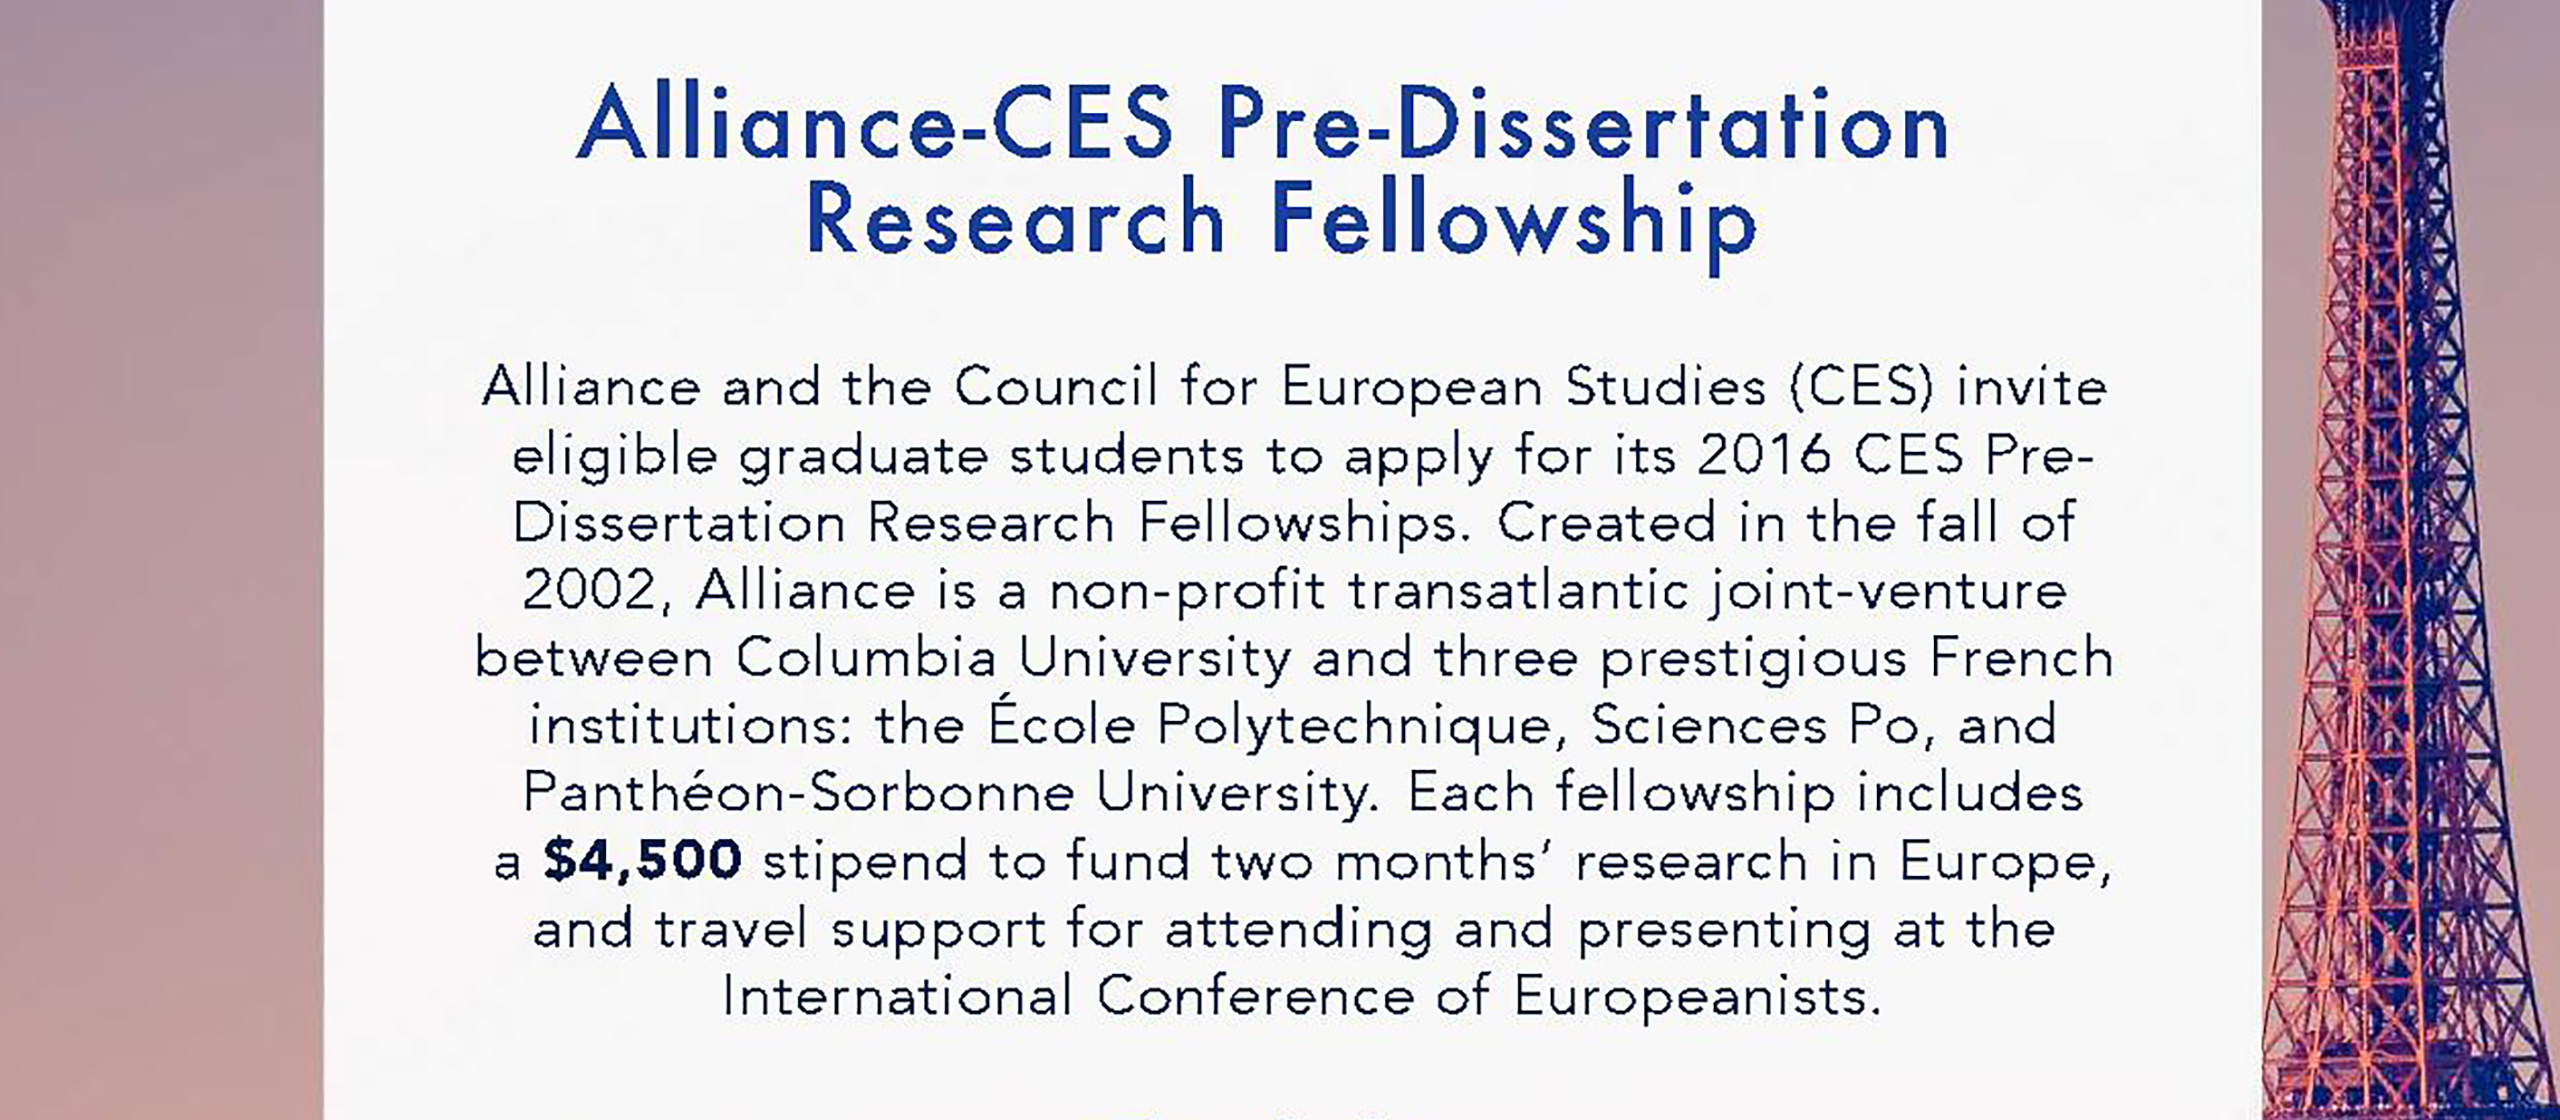 Ces pre-dissertation research fellowships